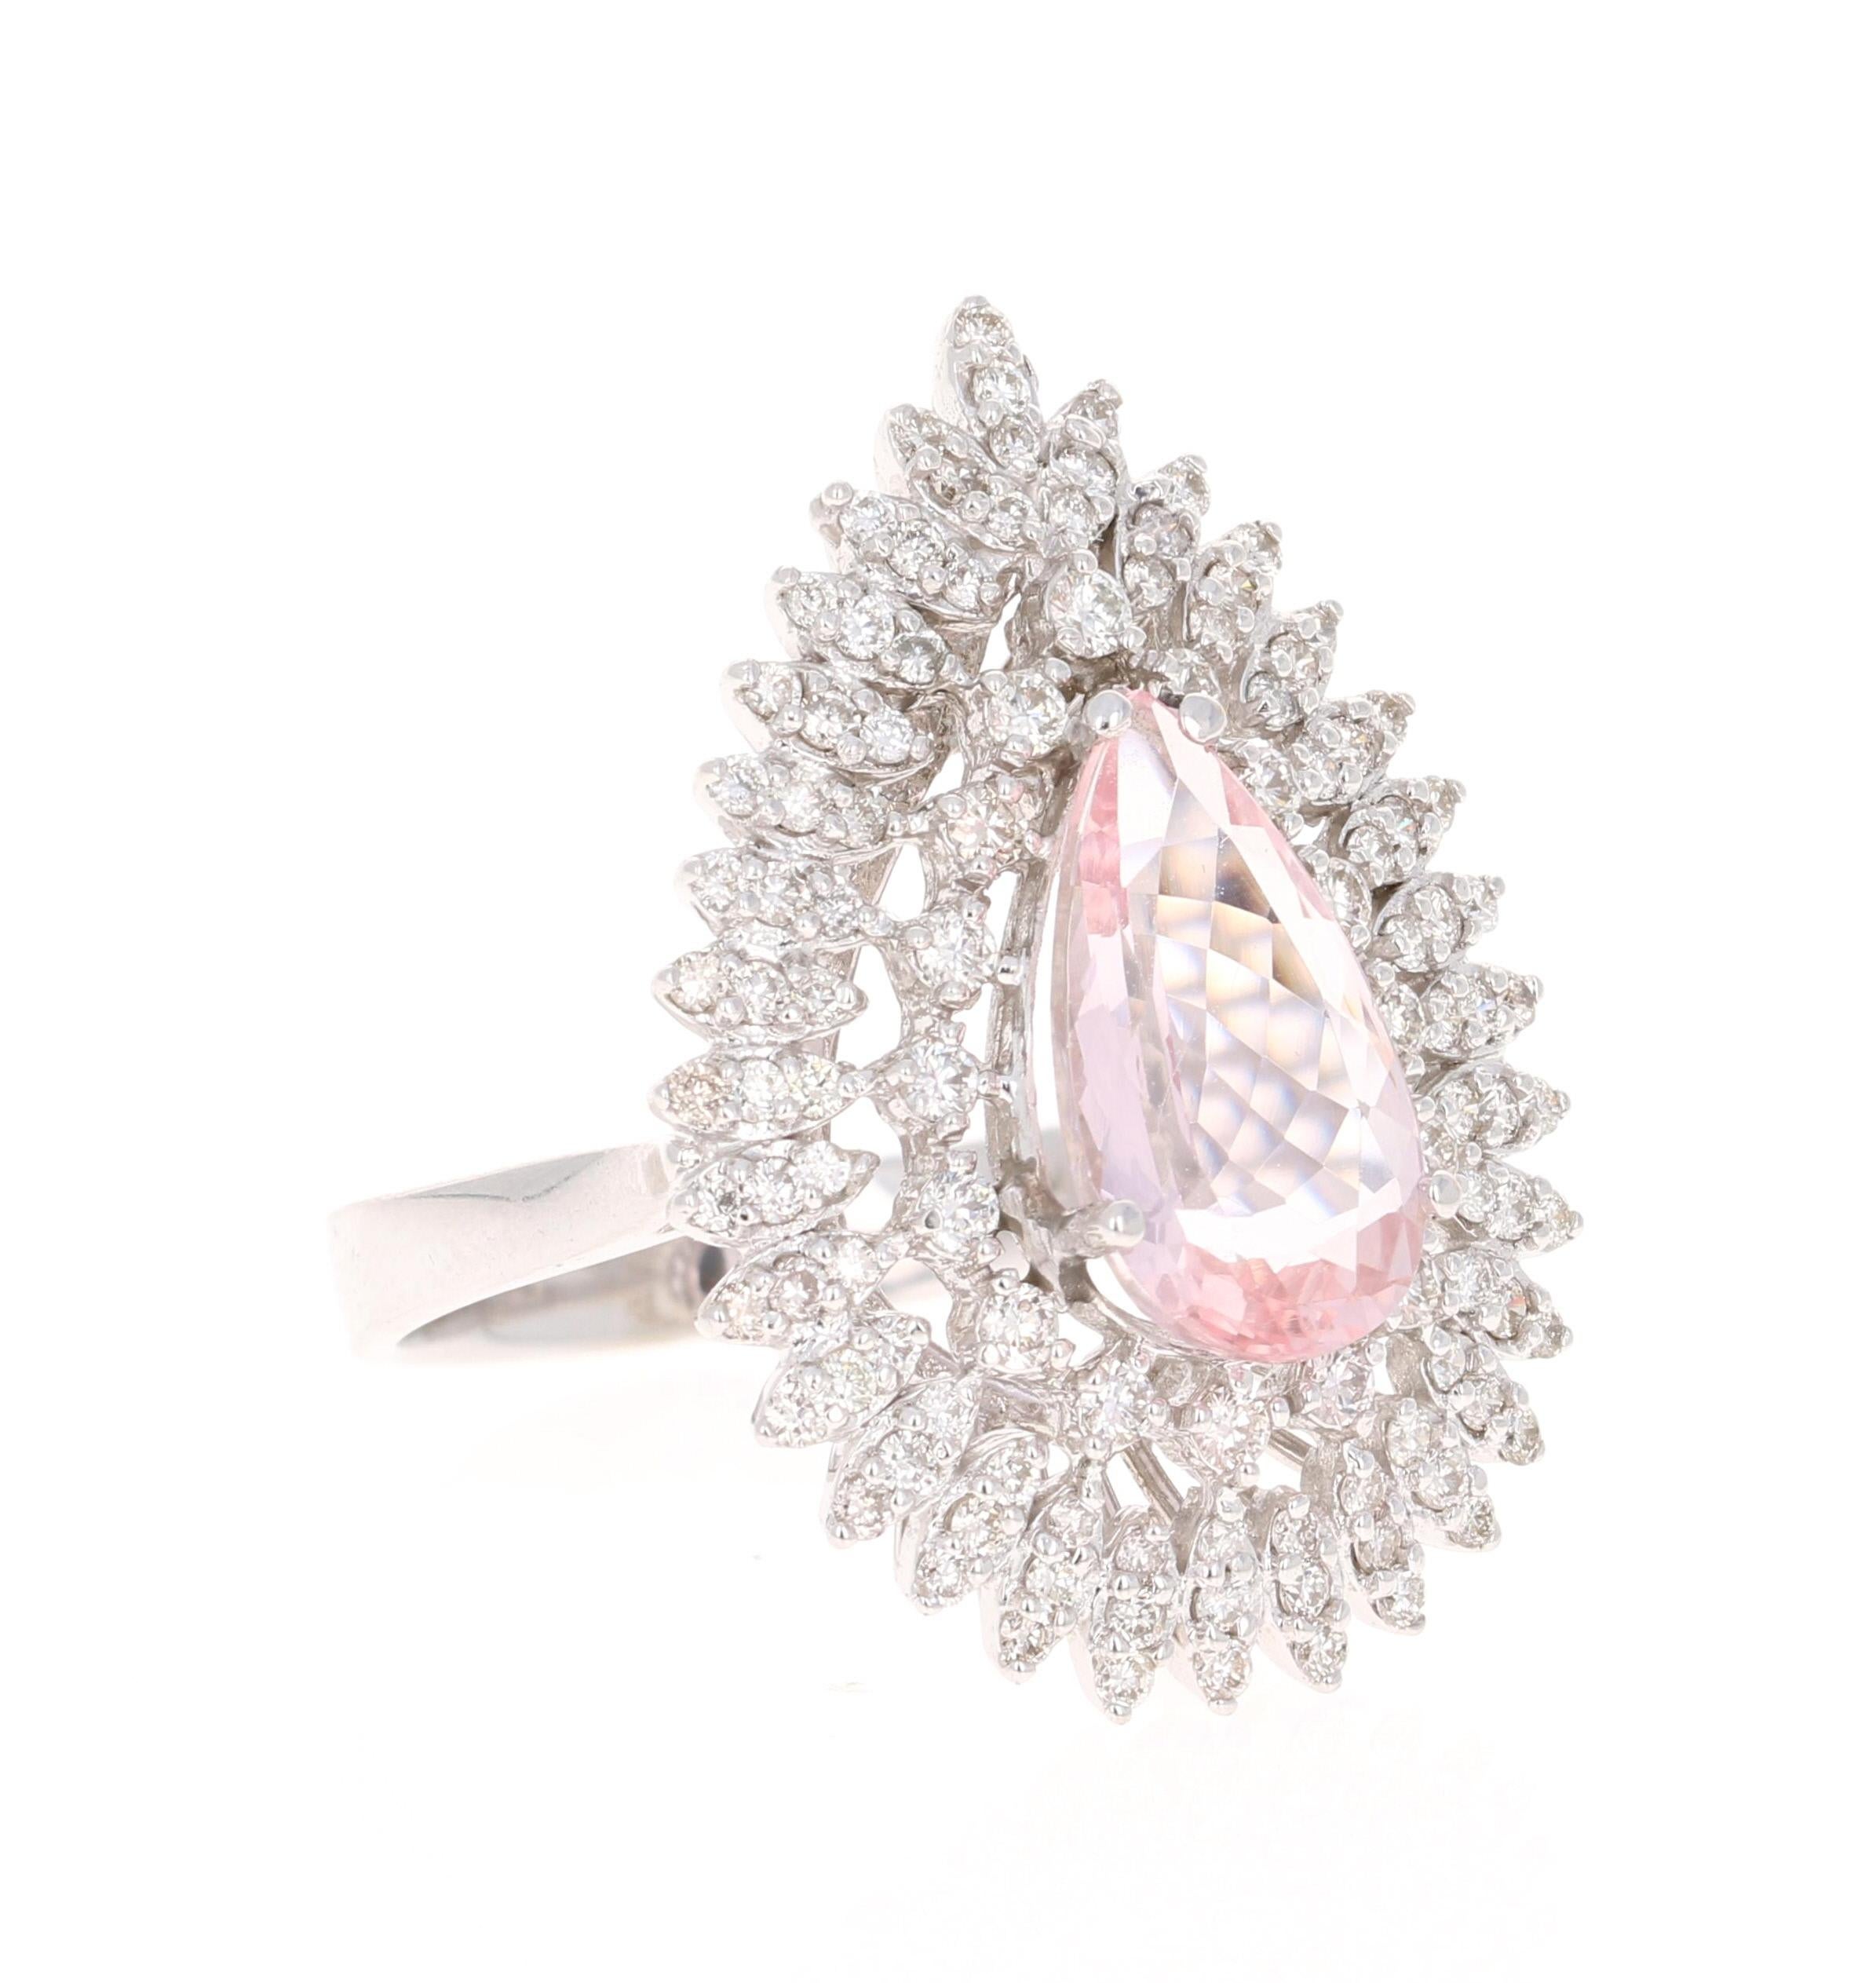 Gorgeous and Unique Morganite Diamond Ring! 

This Morganite ring has a gorgeous 2.92 Carat Pear Cut Pink Morganite and is surrounded by 112 Round Cut Diamonds that weigh 1.37 Carats.  The diamonds have a clarity and color of VS-H The total carat